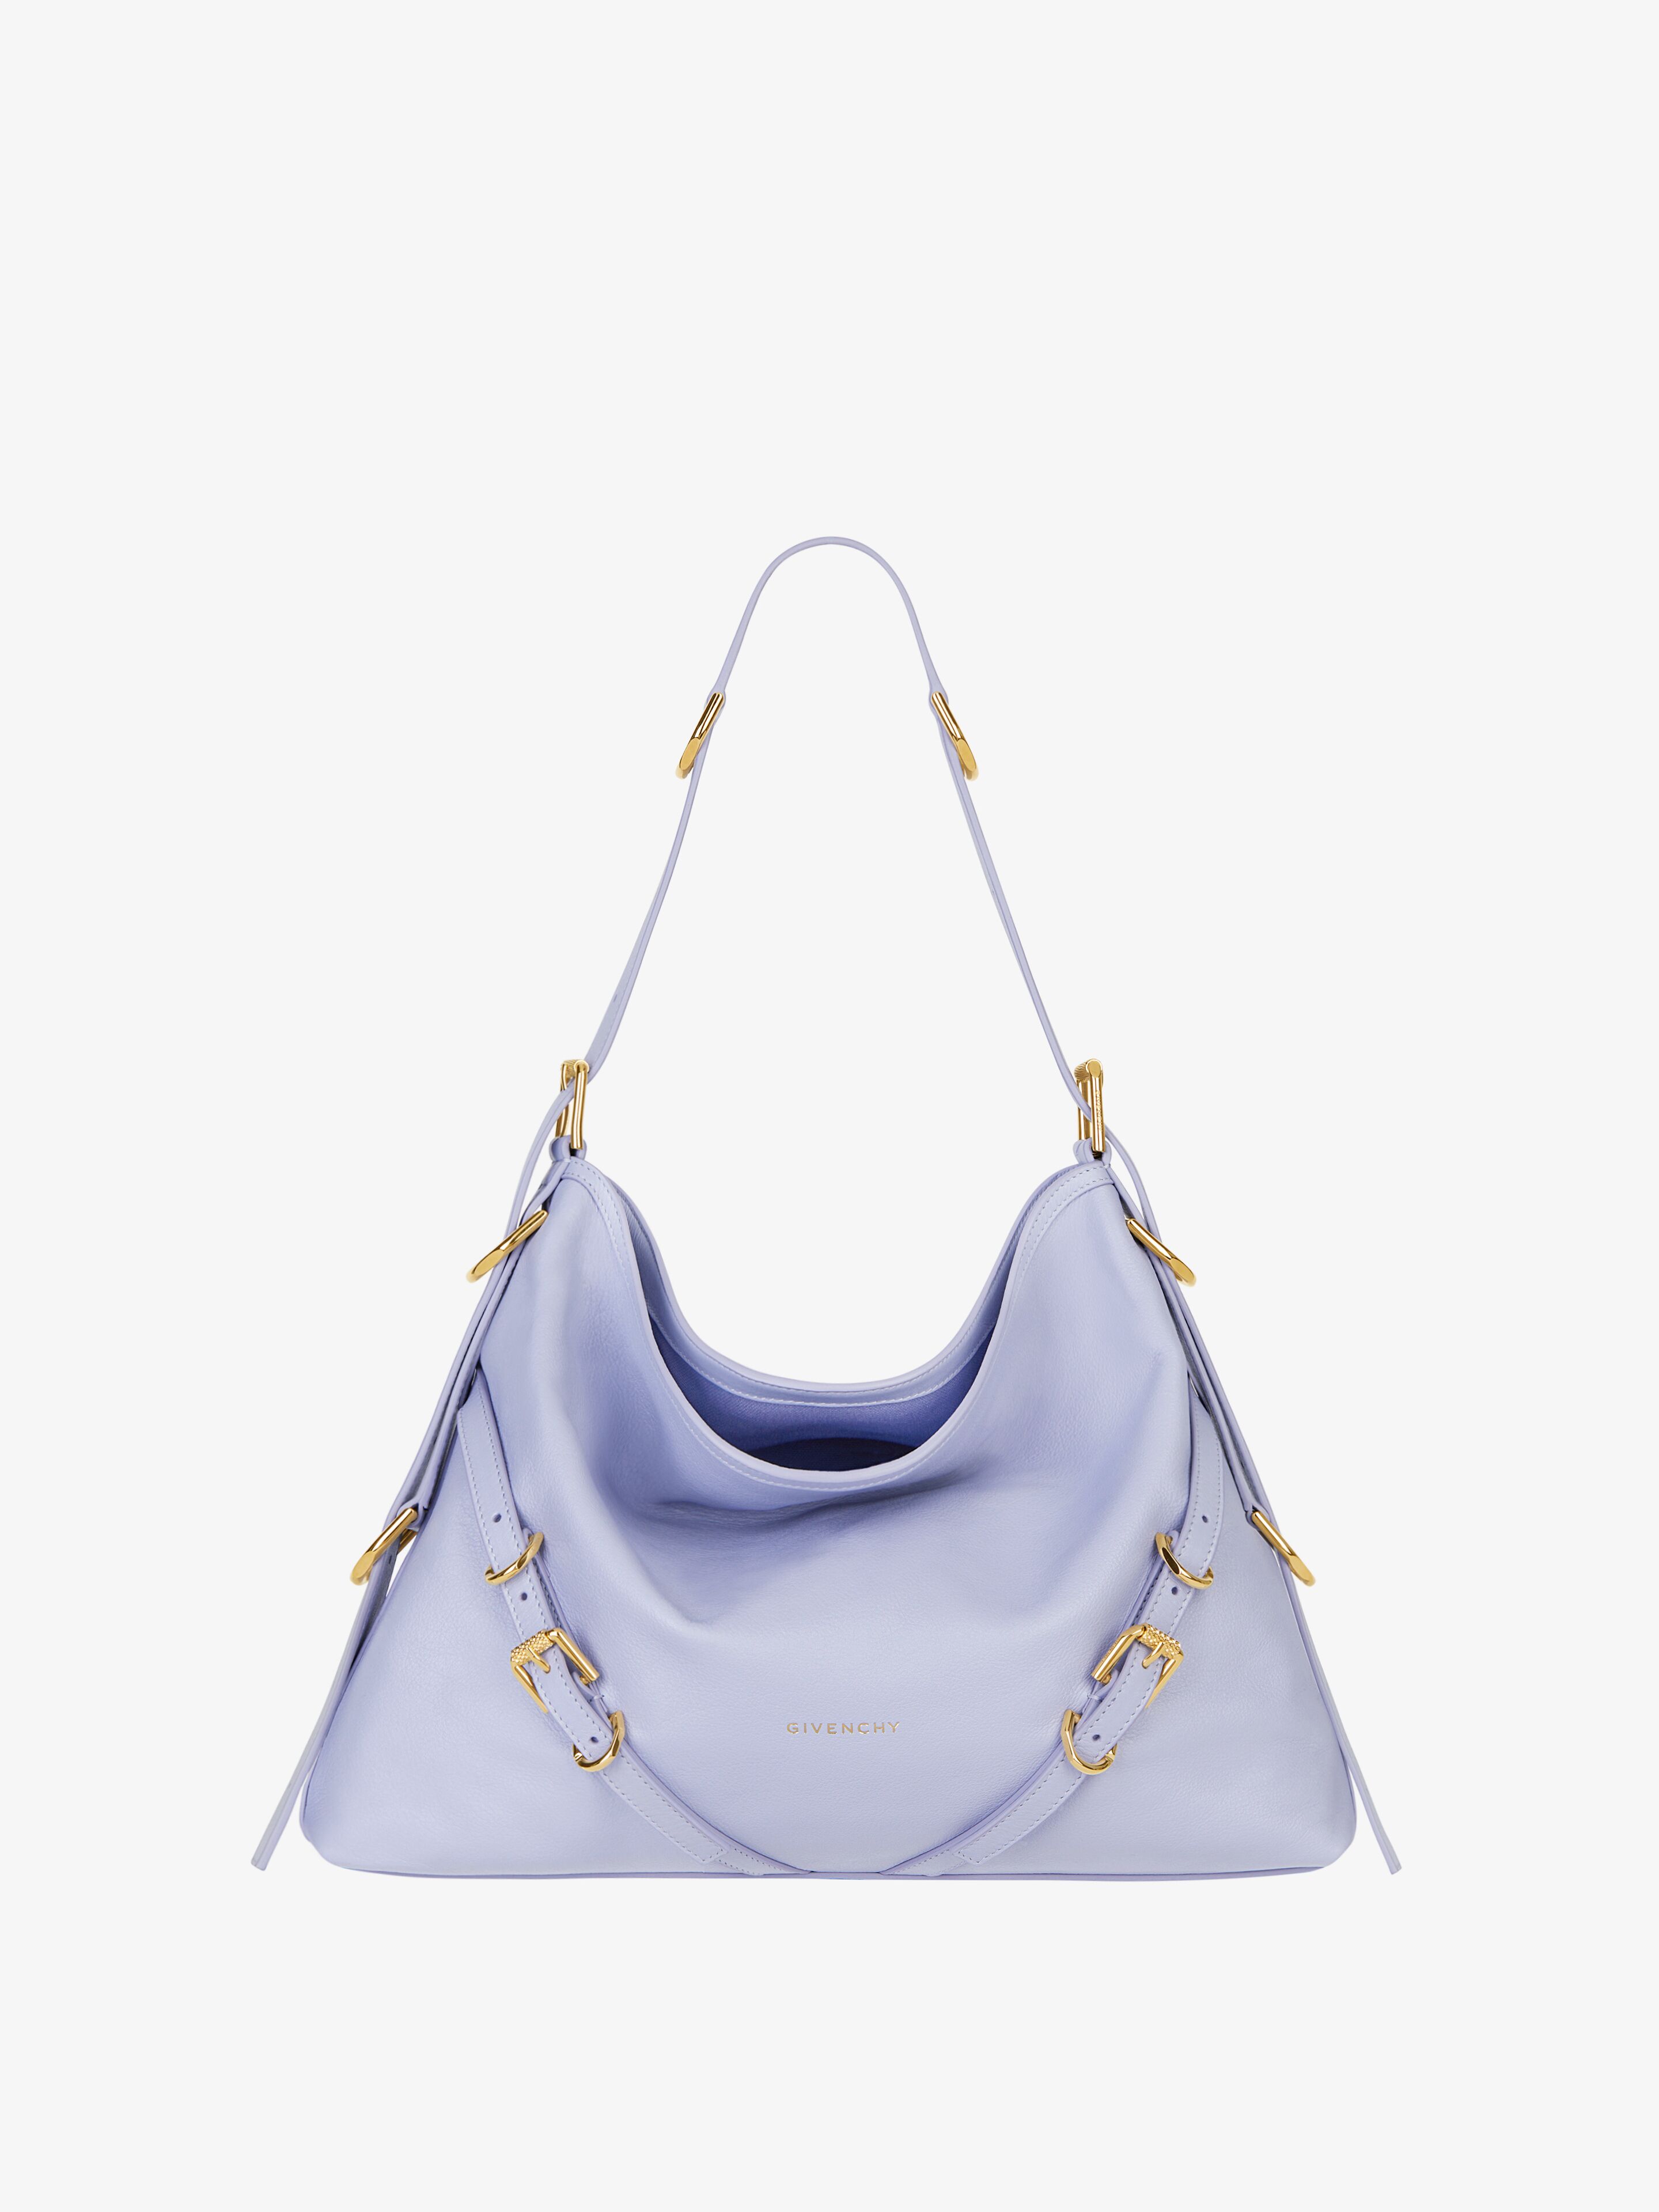 Givenchy Women's Medium Voyou Bag In Leather In Multicolor